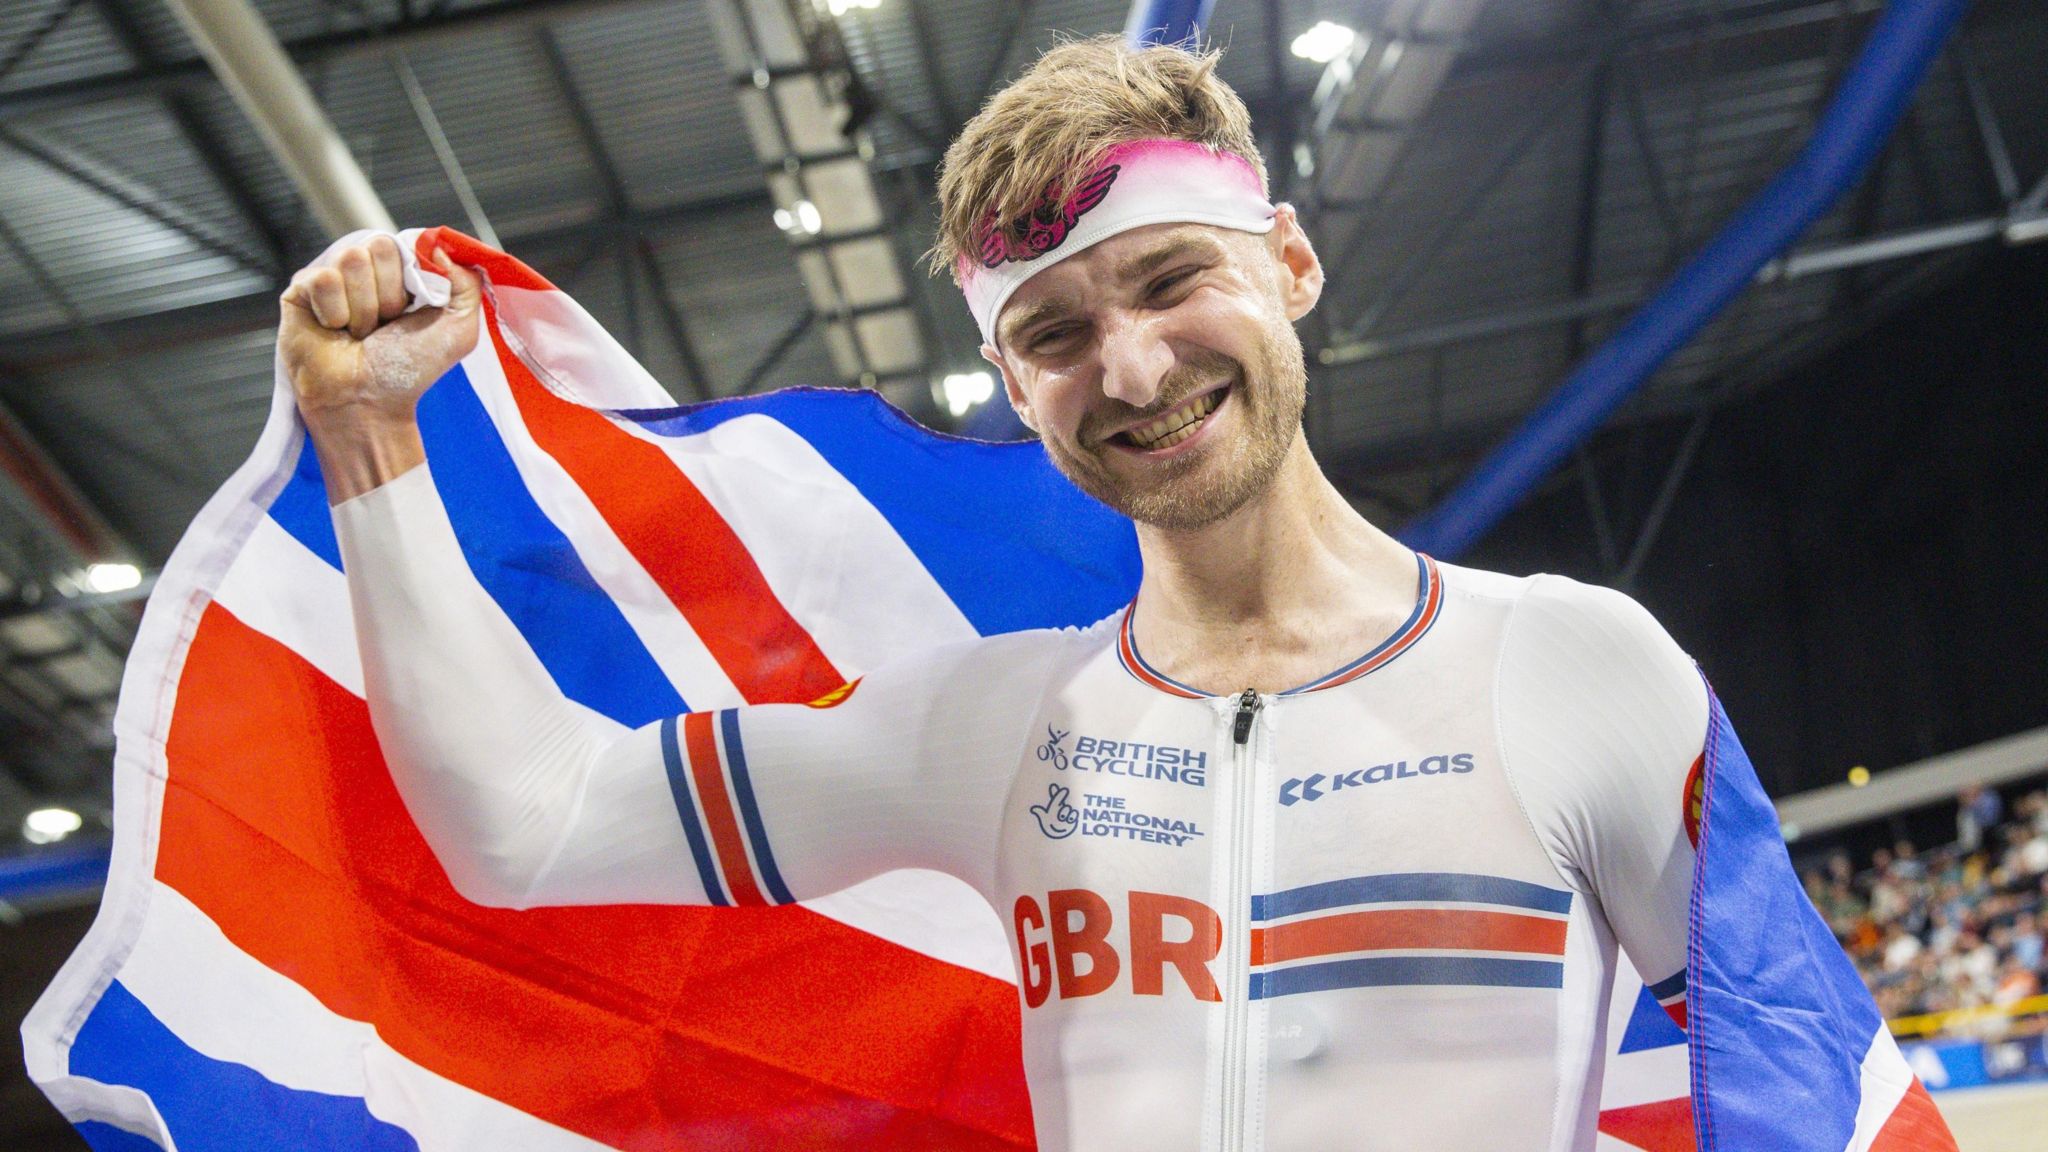 Dan Bigham holds the Union Jack after winning the individual pursuit at the European Track Cycling Championships in 2024